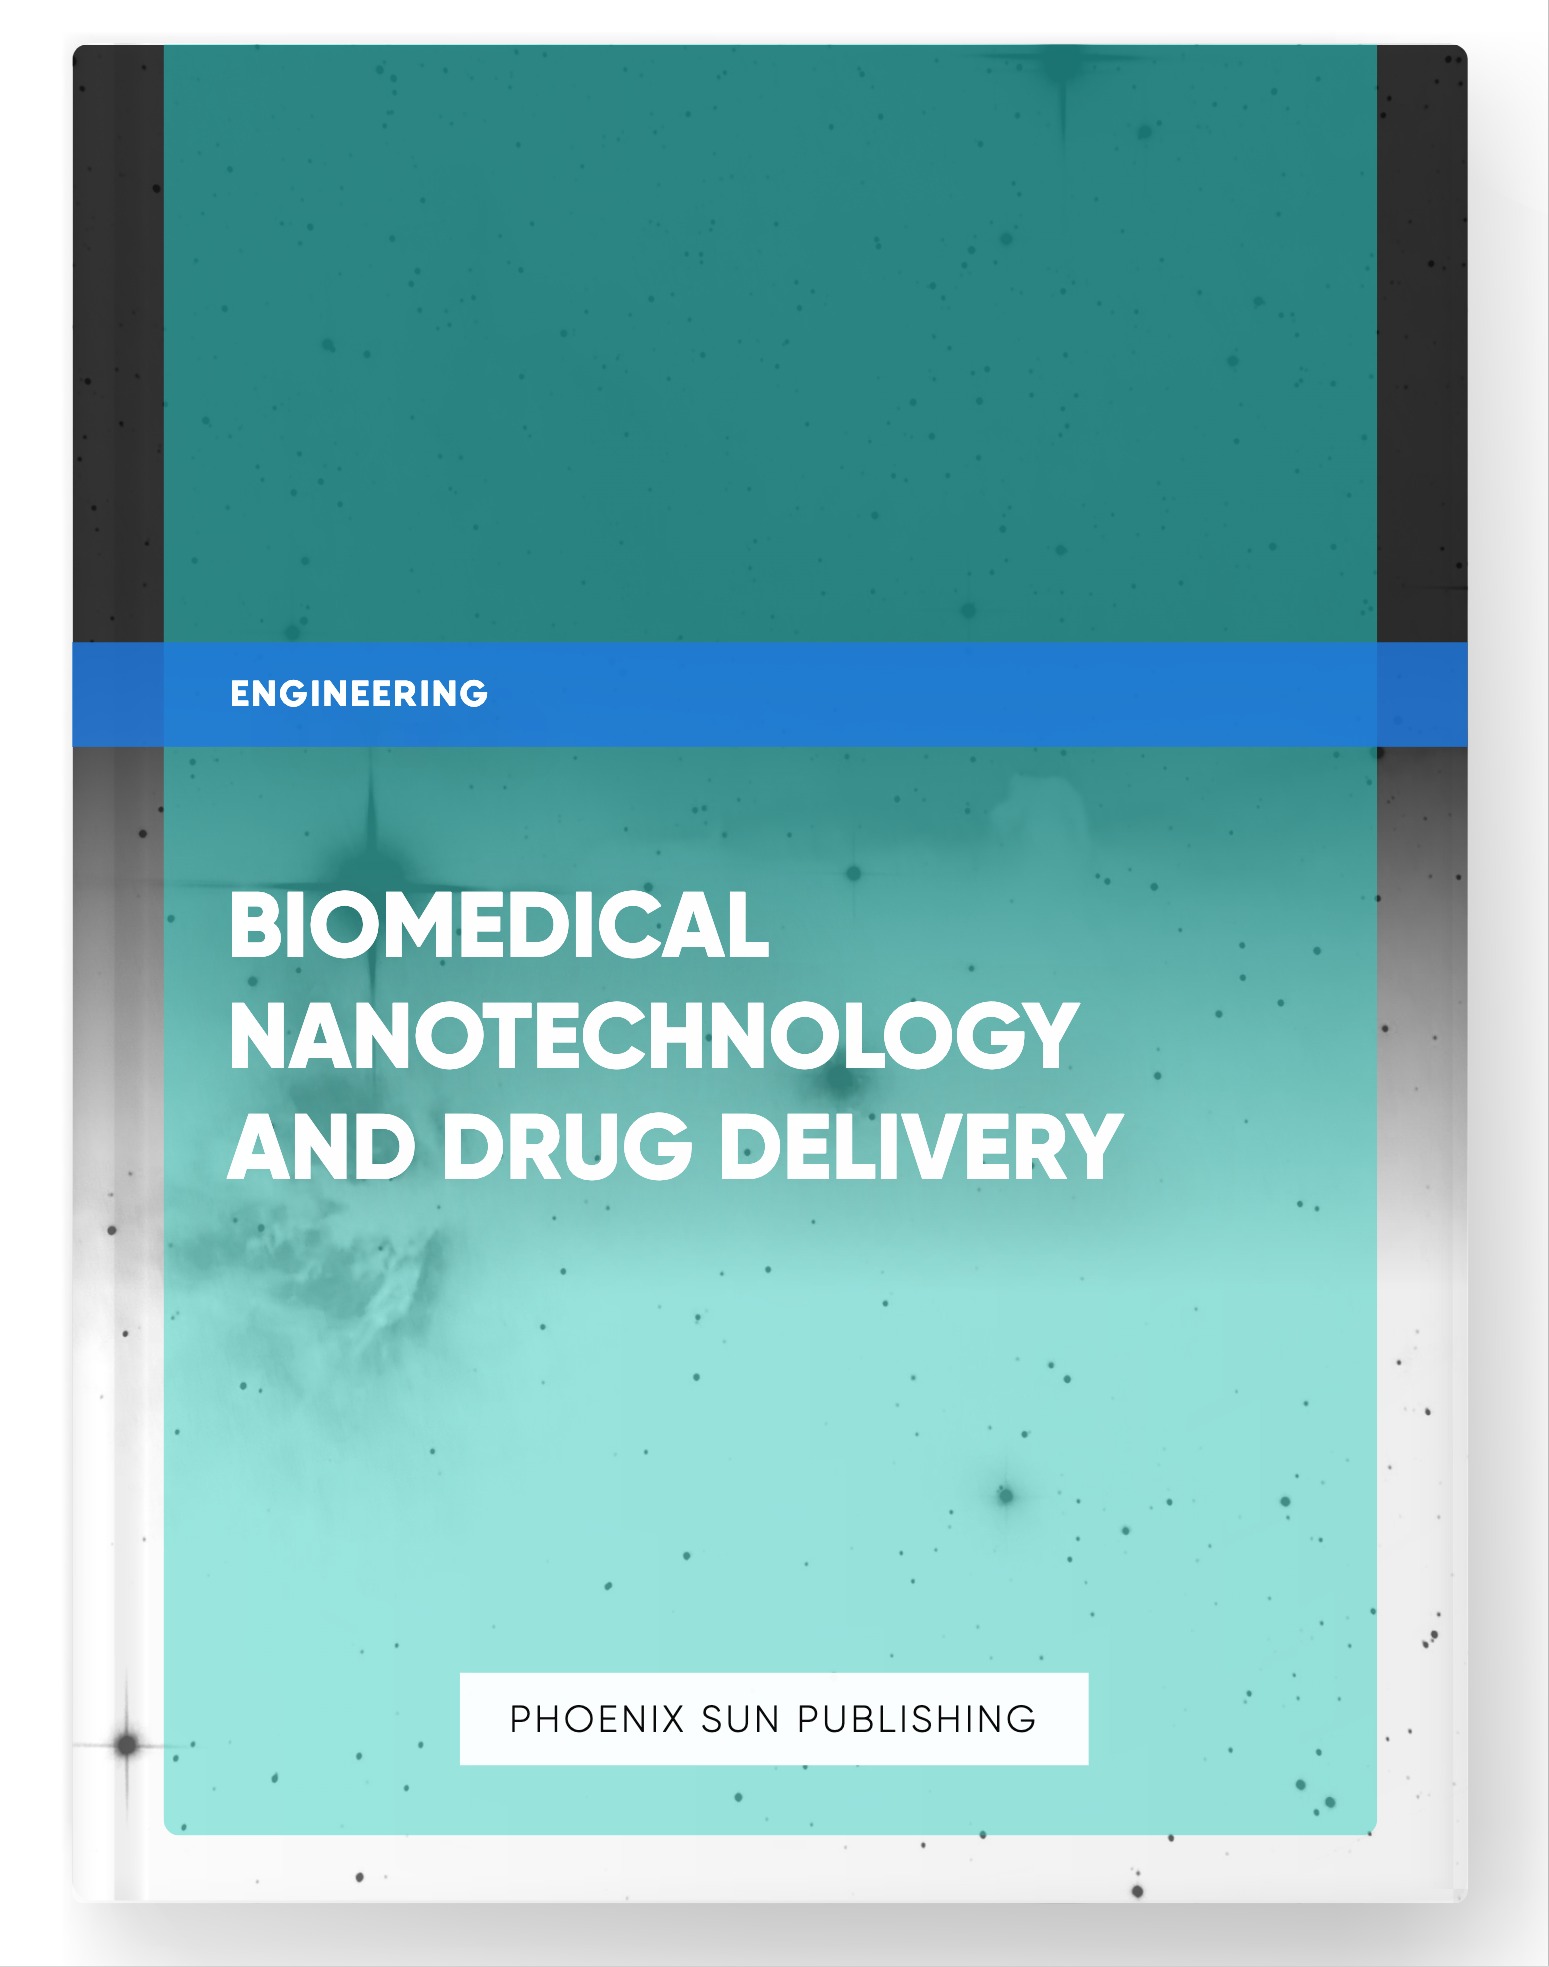 Biomedical Nanotechnology and Drug Delivery